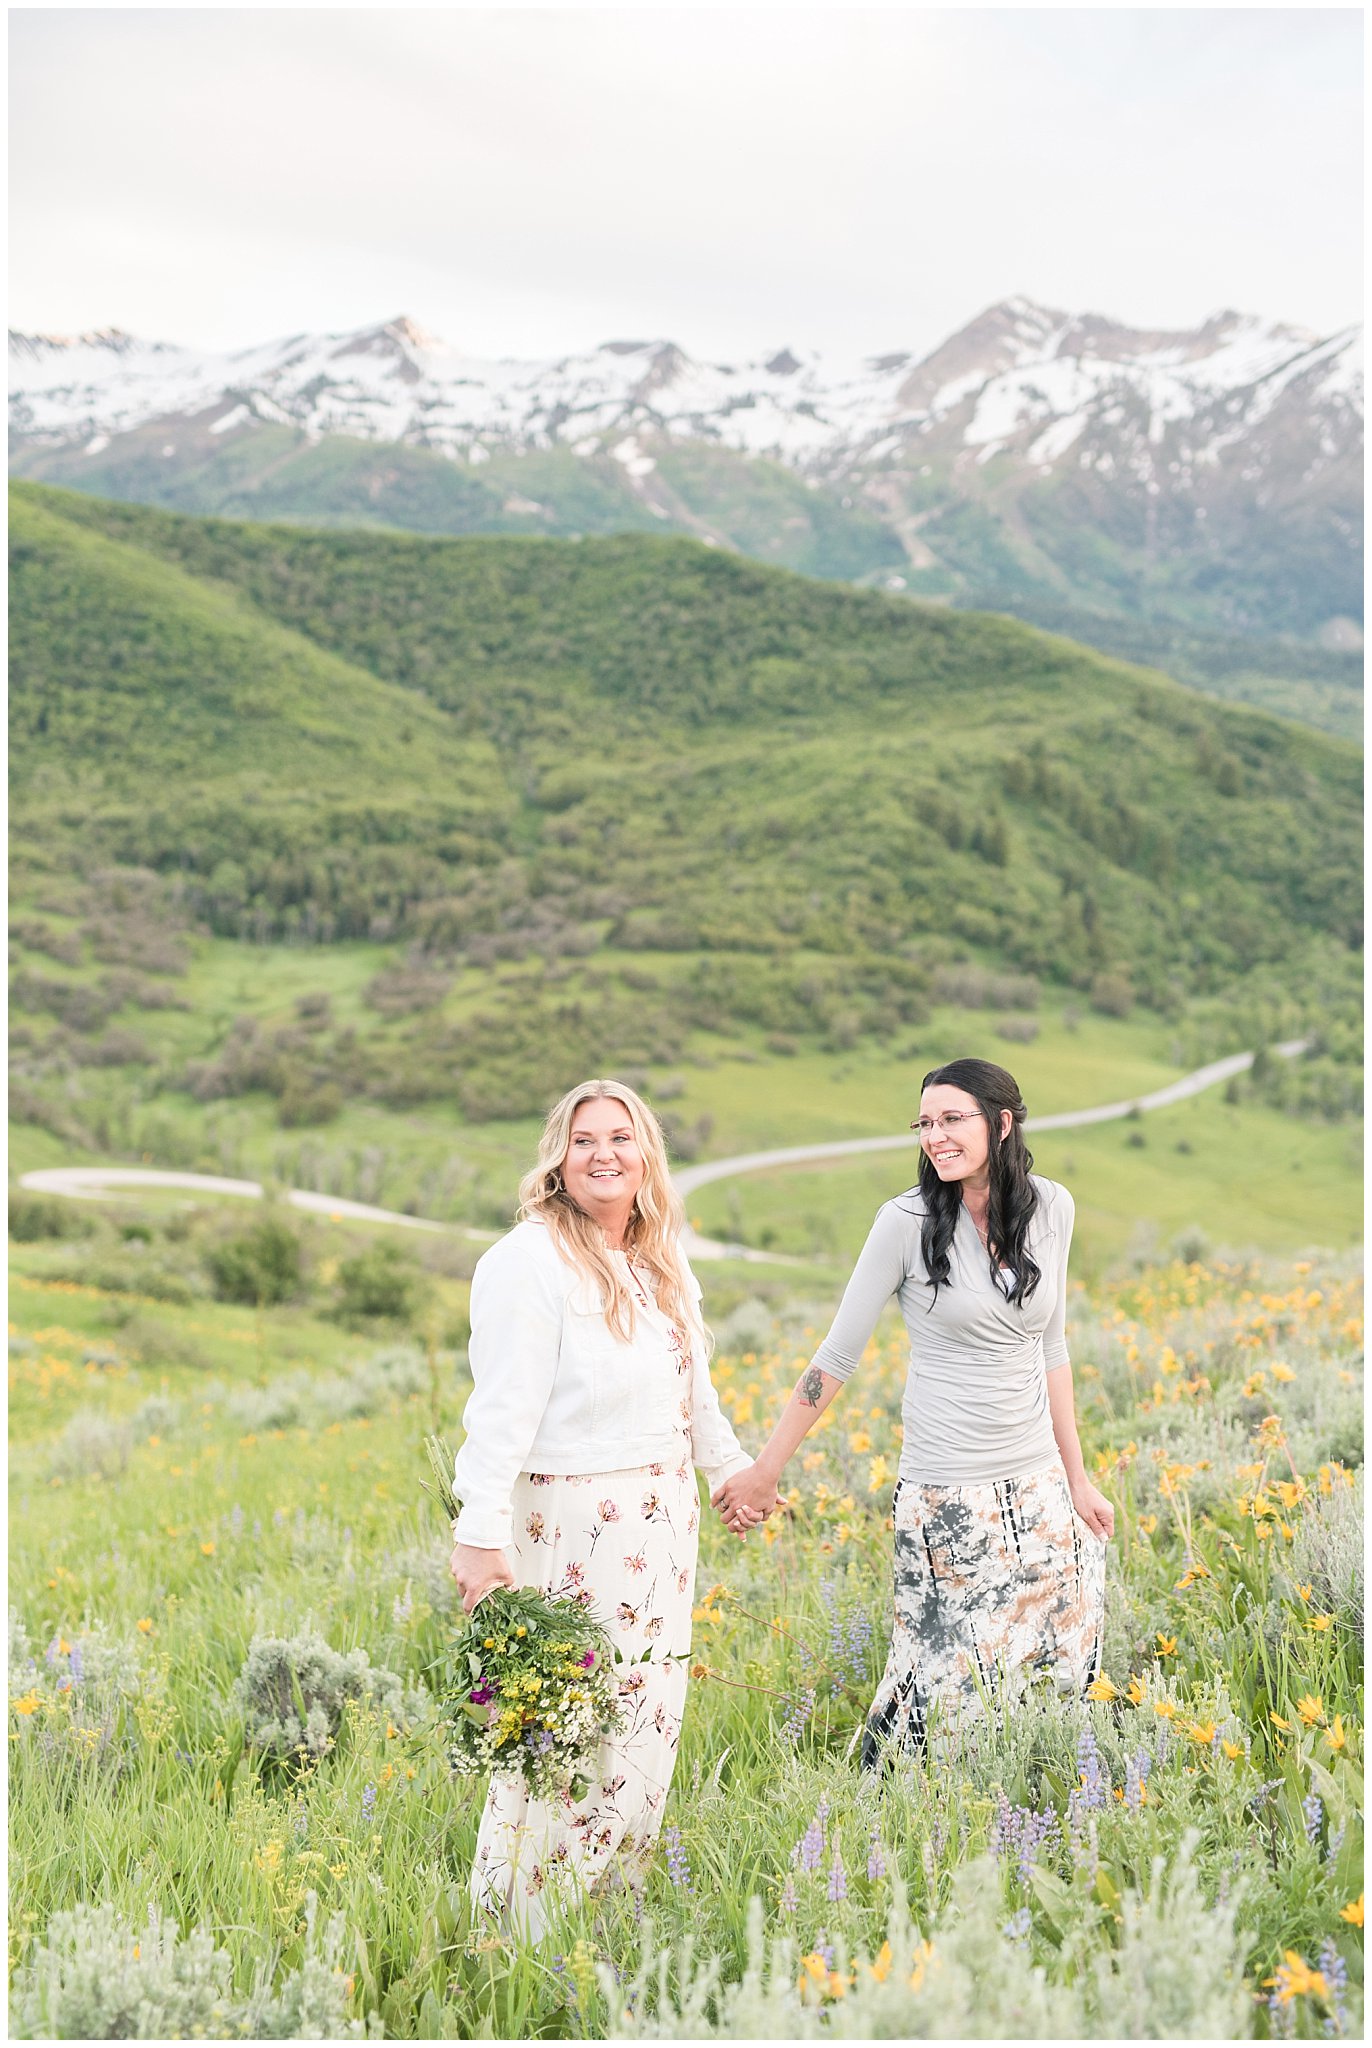 Couple walks with bouquet in front of snow capped mountains | Top Utah Wedding and Couples Photos 2019 | Jessie and Dallin Photography